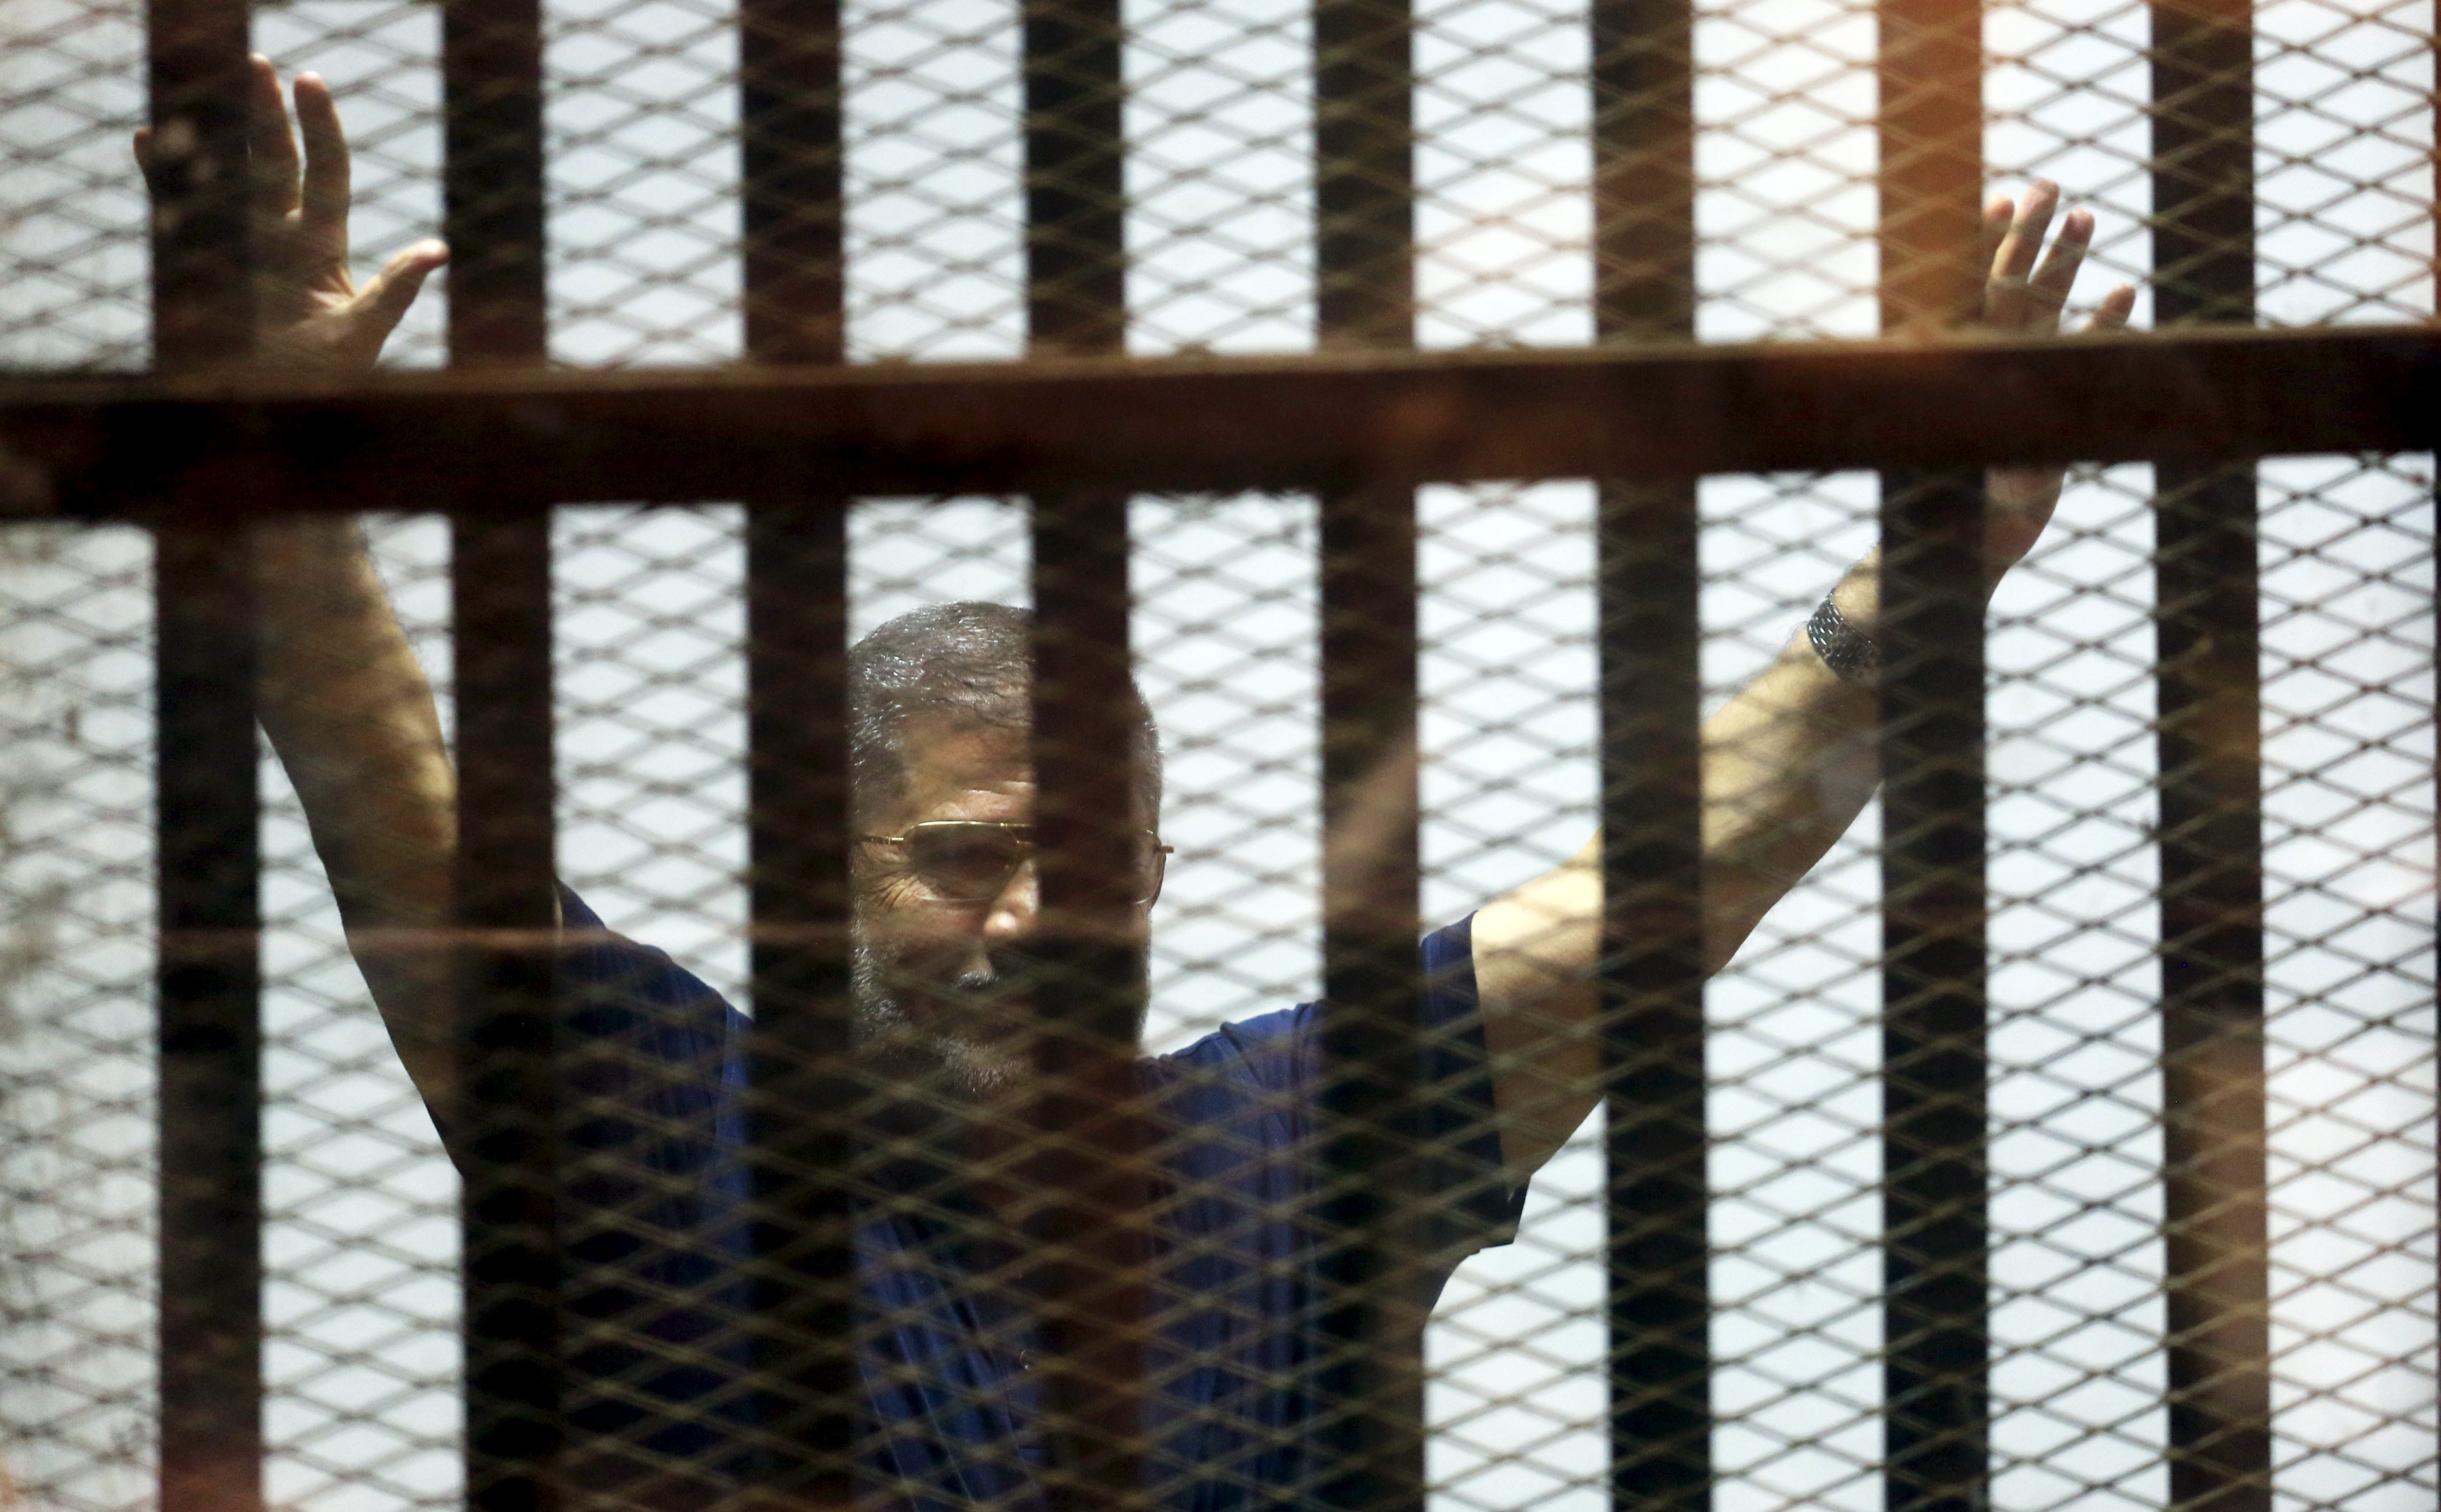 Former Egyptian President Mohamed Mursi waves during his appearance in court on the outskirts of Cairo, Egypt, June 2, 2015. An Egyptian court postponed on Tuesday issuing a final ruling over a death sentence recommendation for former Islamist President Mohamed Mursi and other top Muslim Brotherhood leaders in a case related to a 2011 mass jail break. The judge said the case was postponed to June 16. REUTERS/Amr Abdallah Dalsh